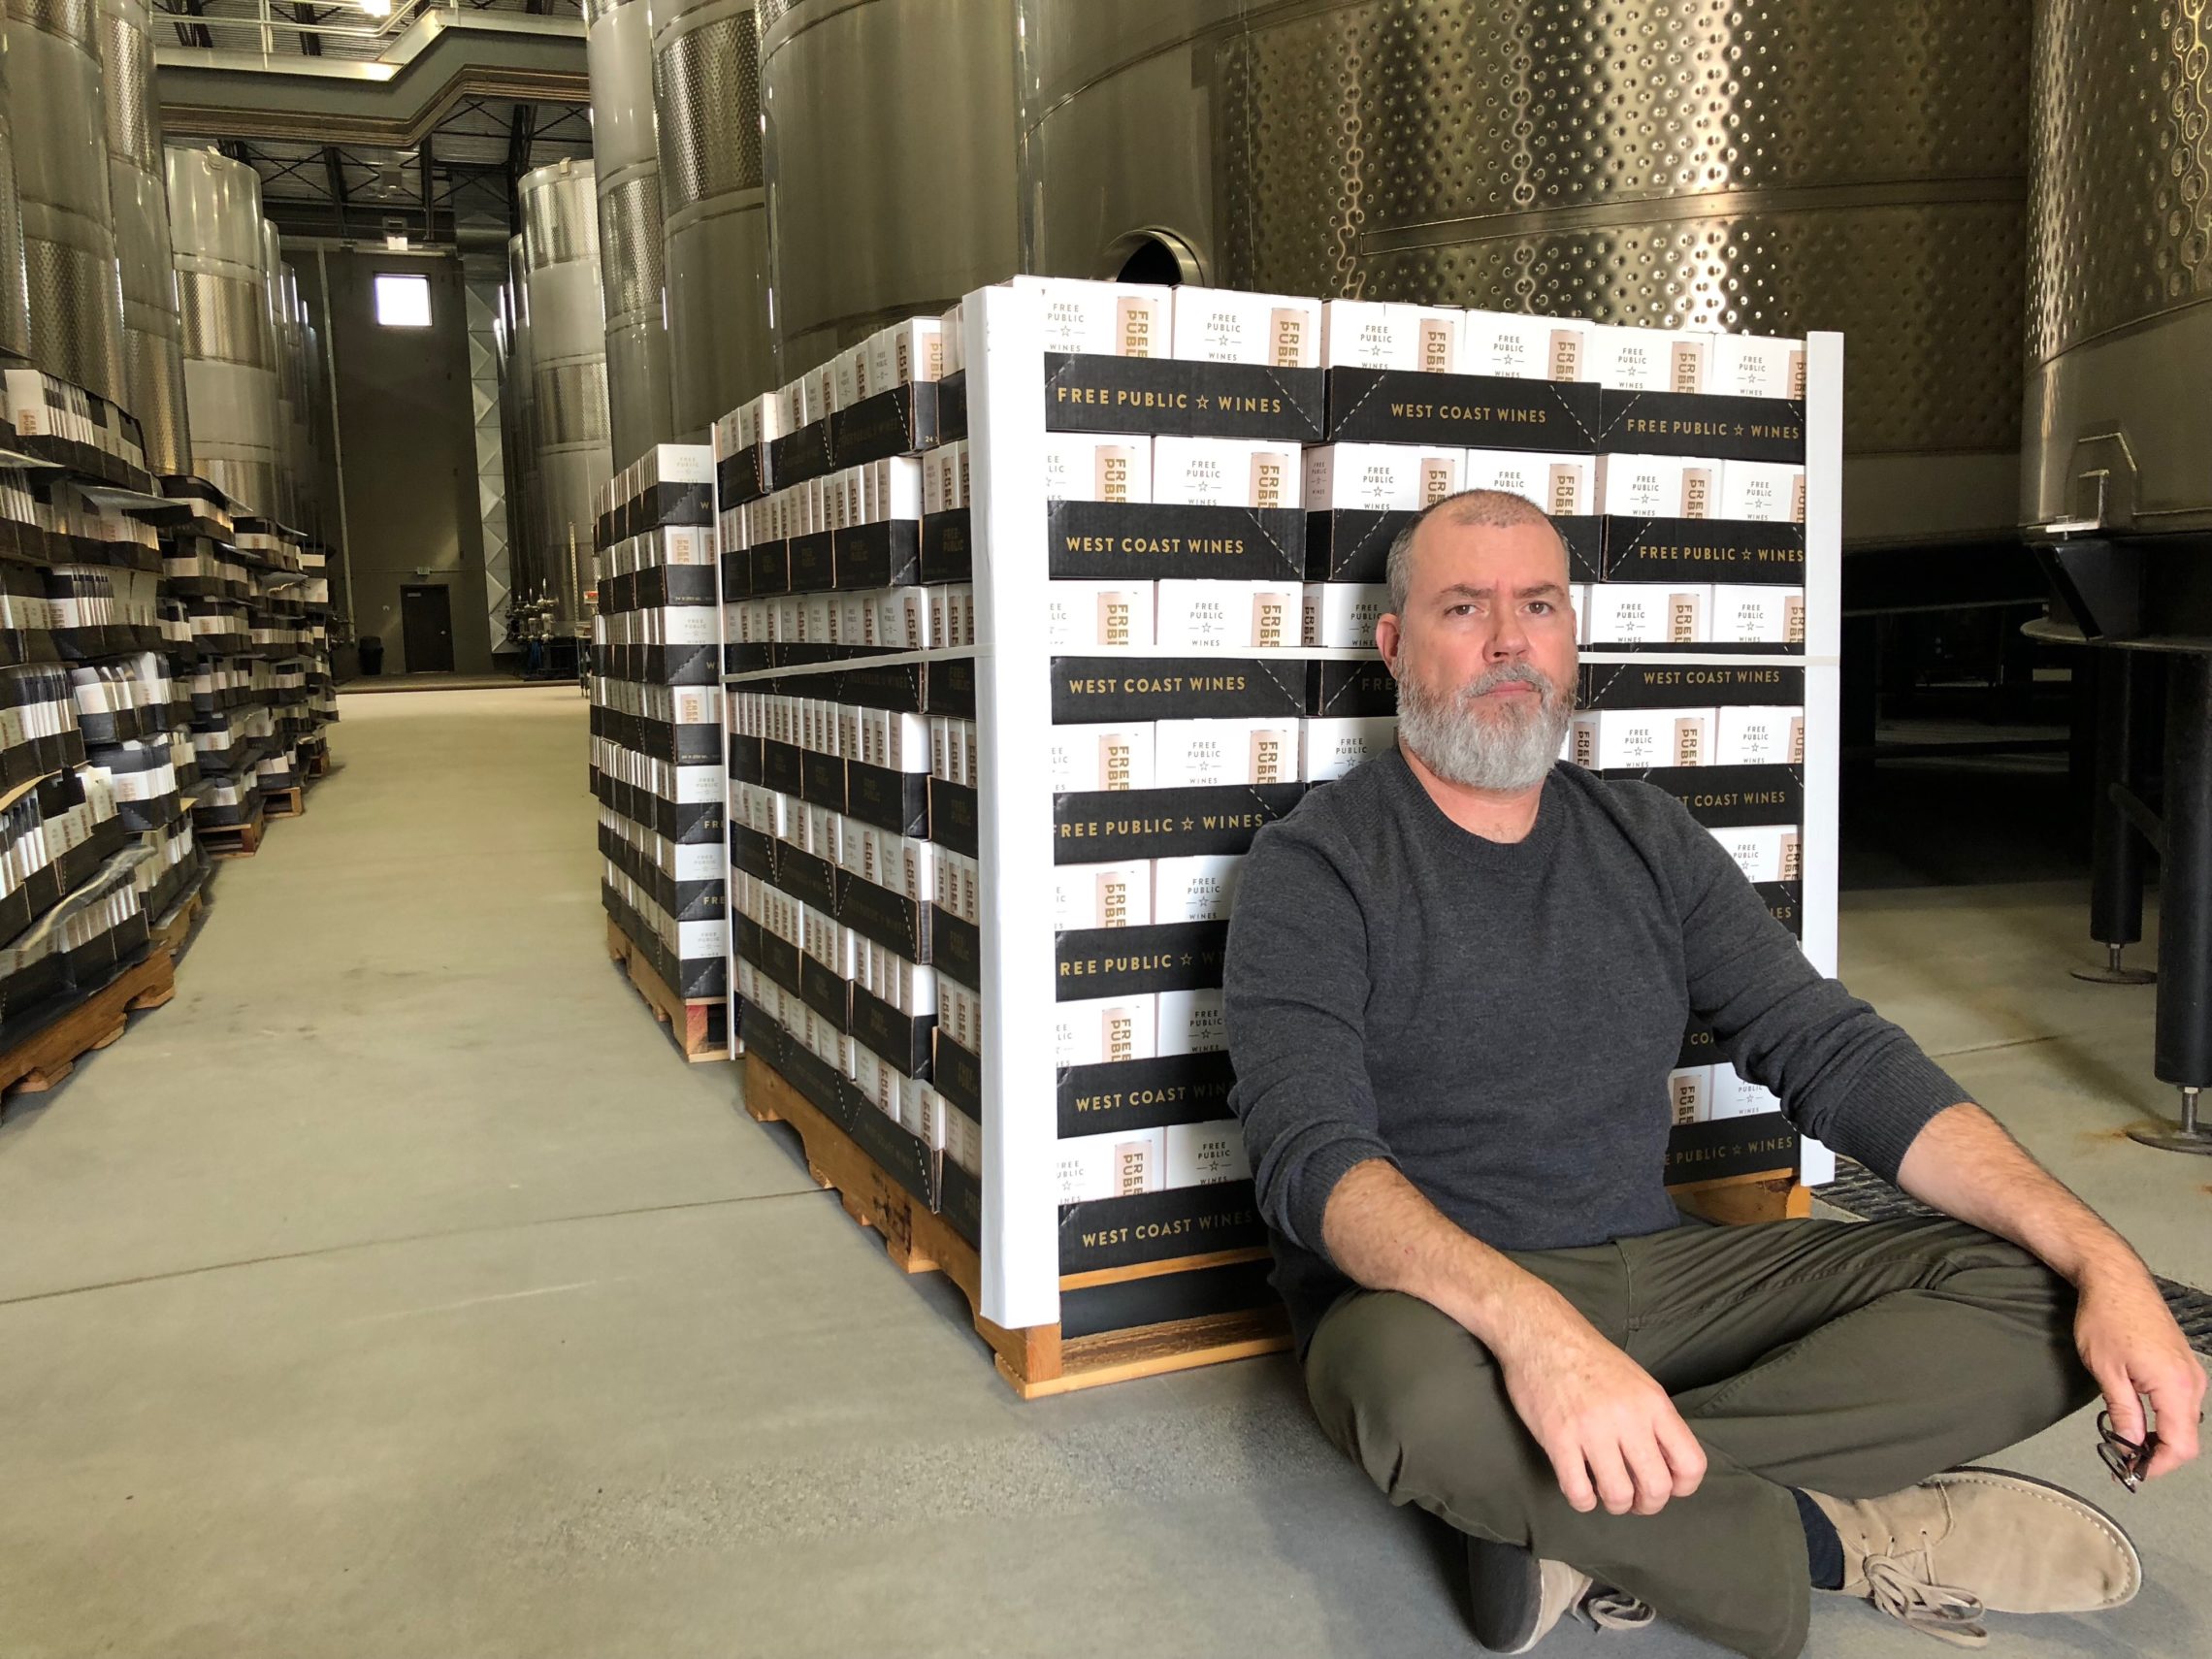 Michael Etter, president of Free Public wines, sits in front of a freshly canned pallet that’s ready to ship in Prosser, Wash. CREDIT: ANNA KING/N3